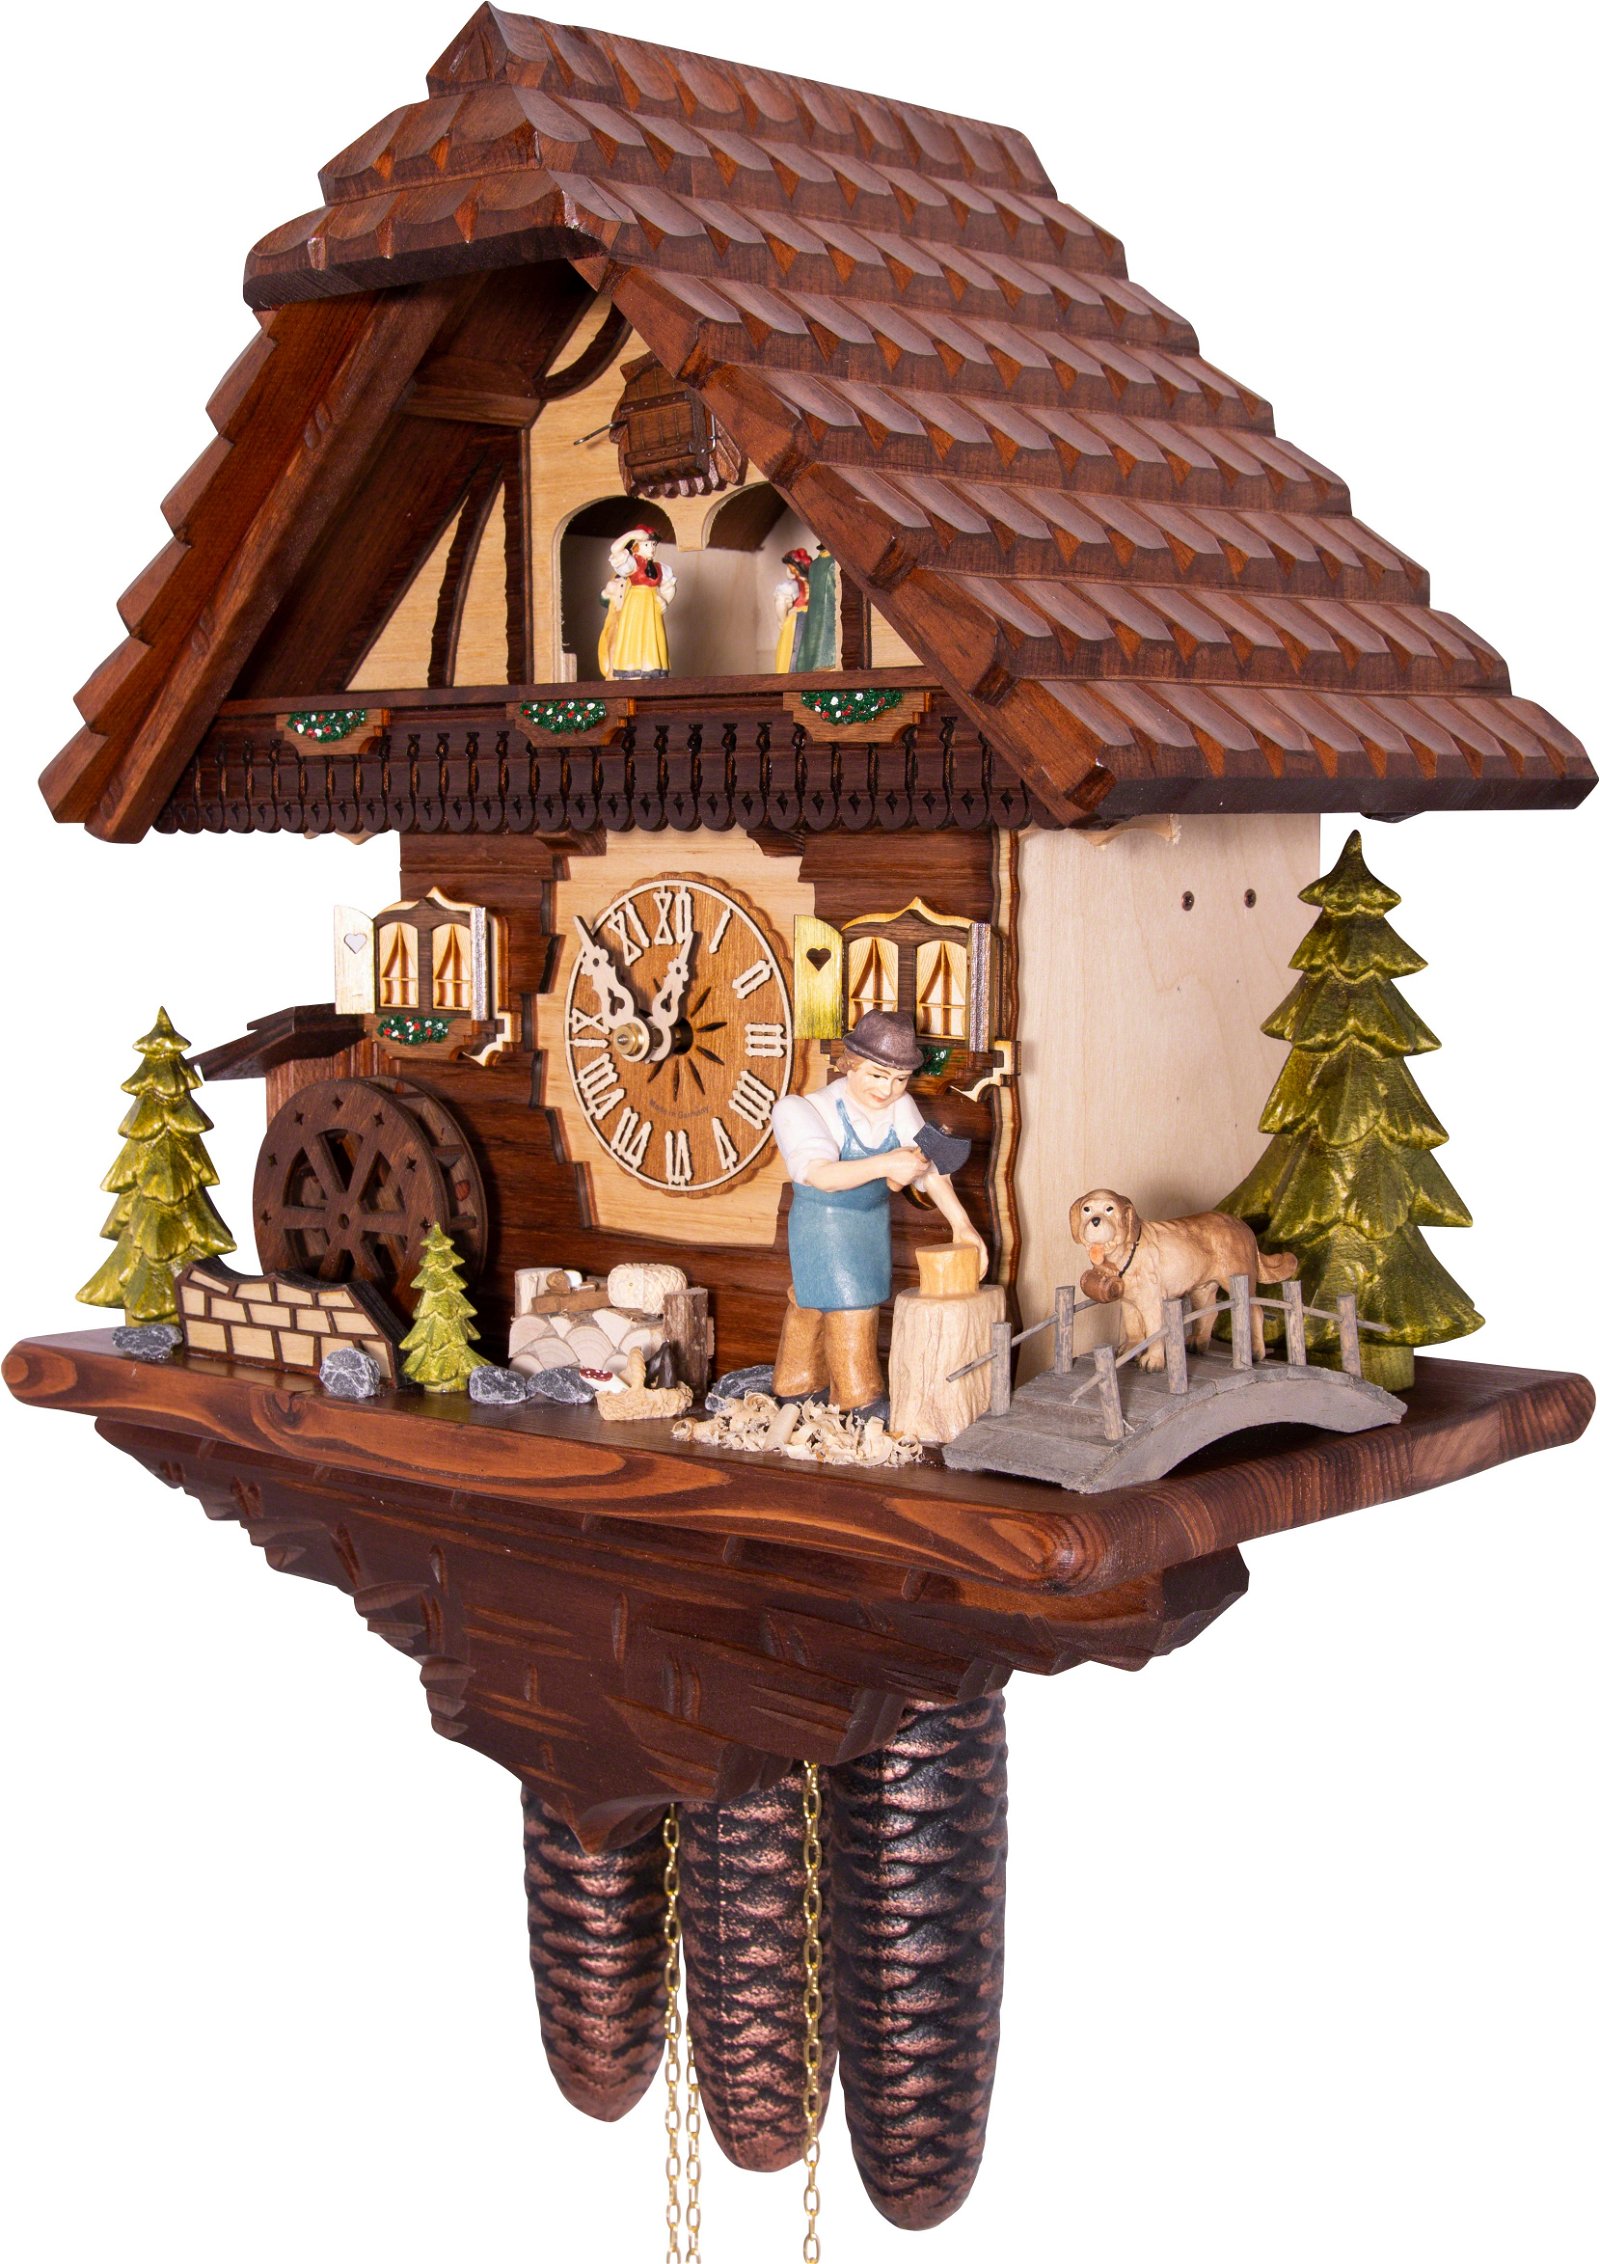 Cuckoo Clock 8-day-movement Chalet-Style 43cm by Hekas